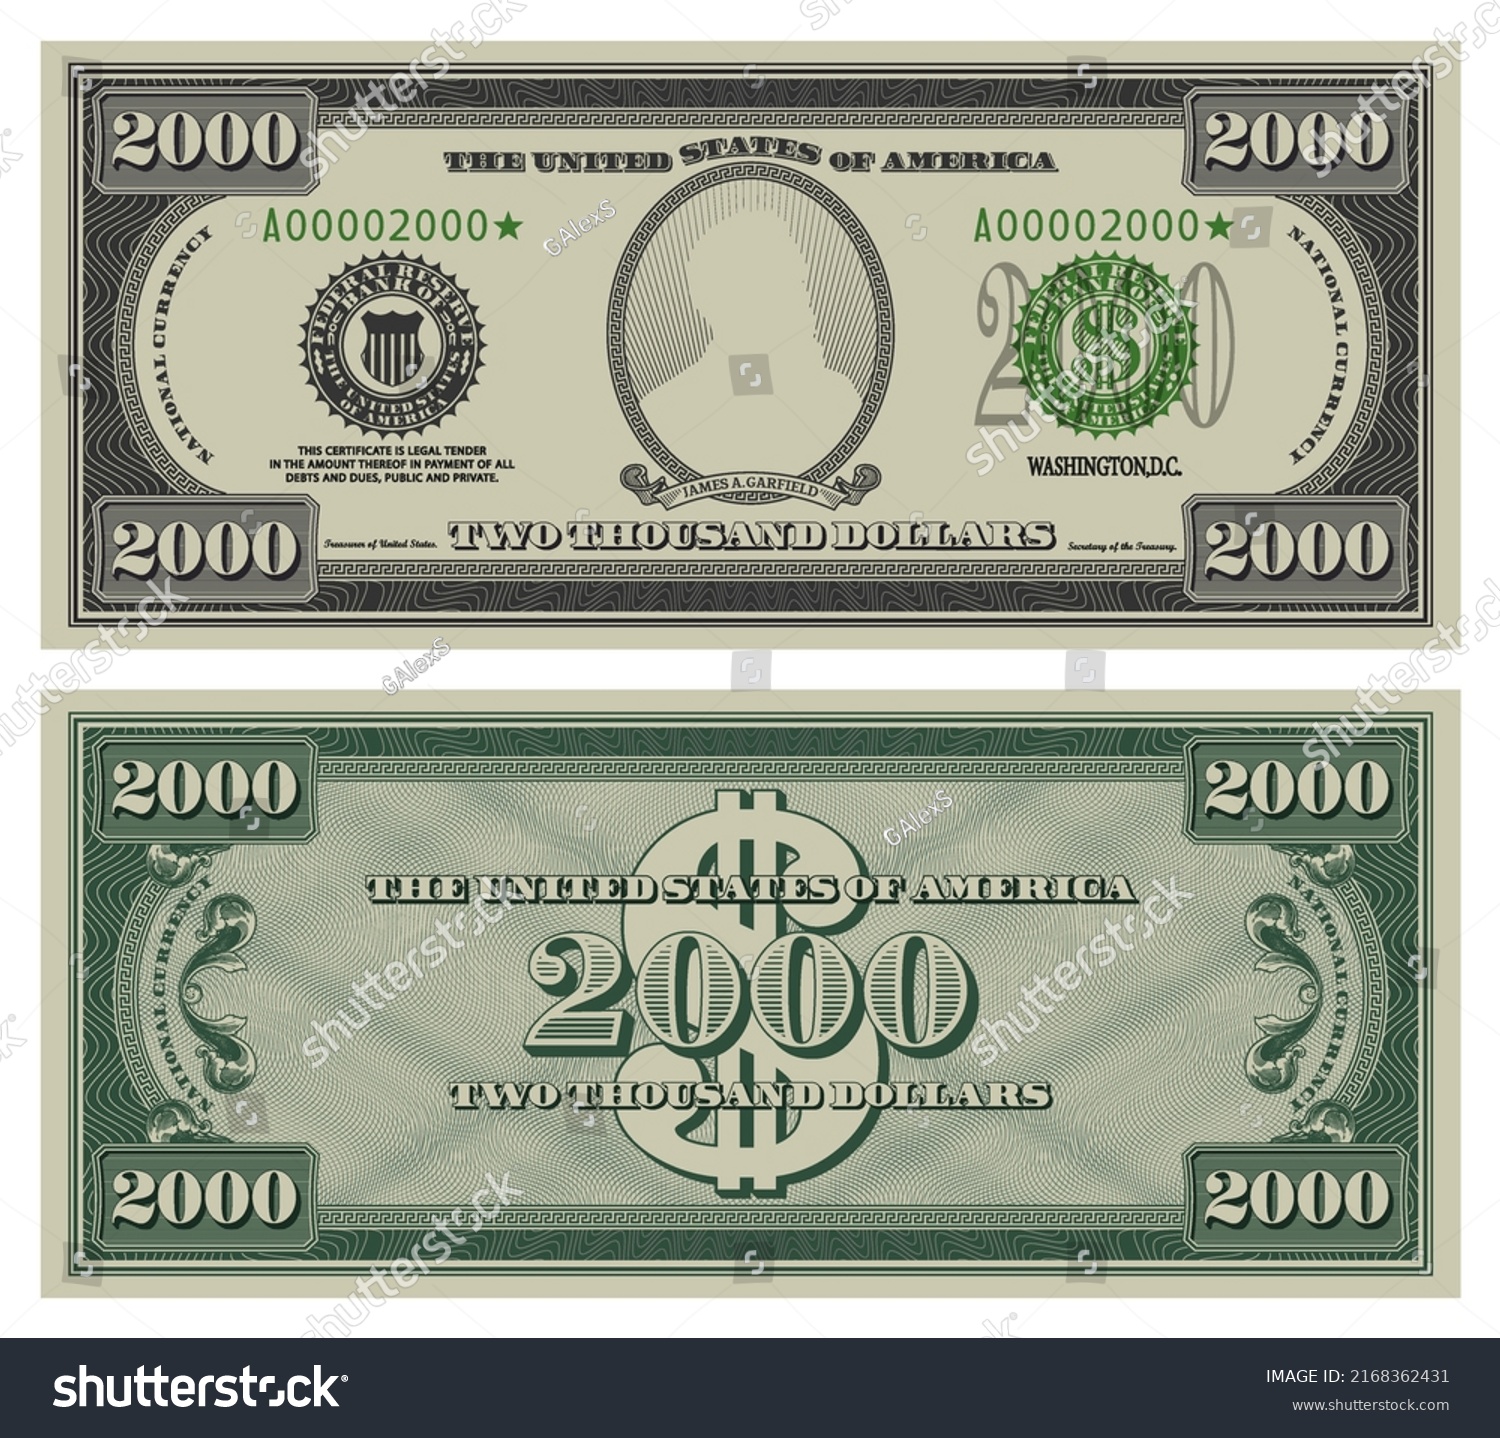 SVG of Vector two thousand dollars banknote. Gray obverse and green reverse fictional US paper money in style of vintage american cash. Frame with guilloche mesh and bank seals. James A. Garfield svg